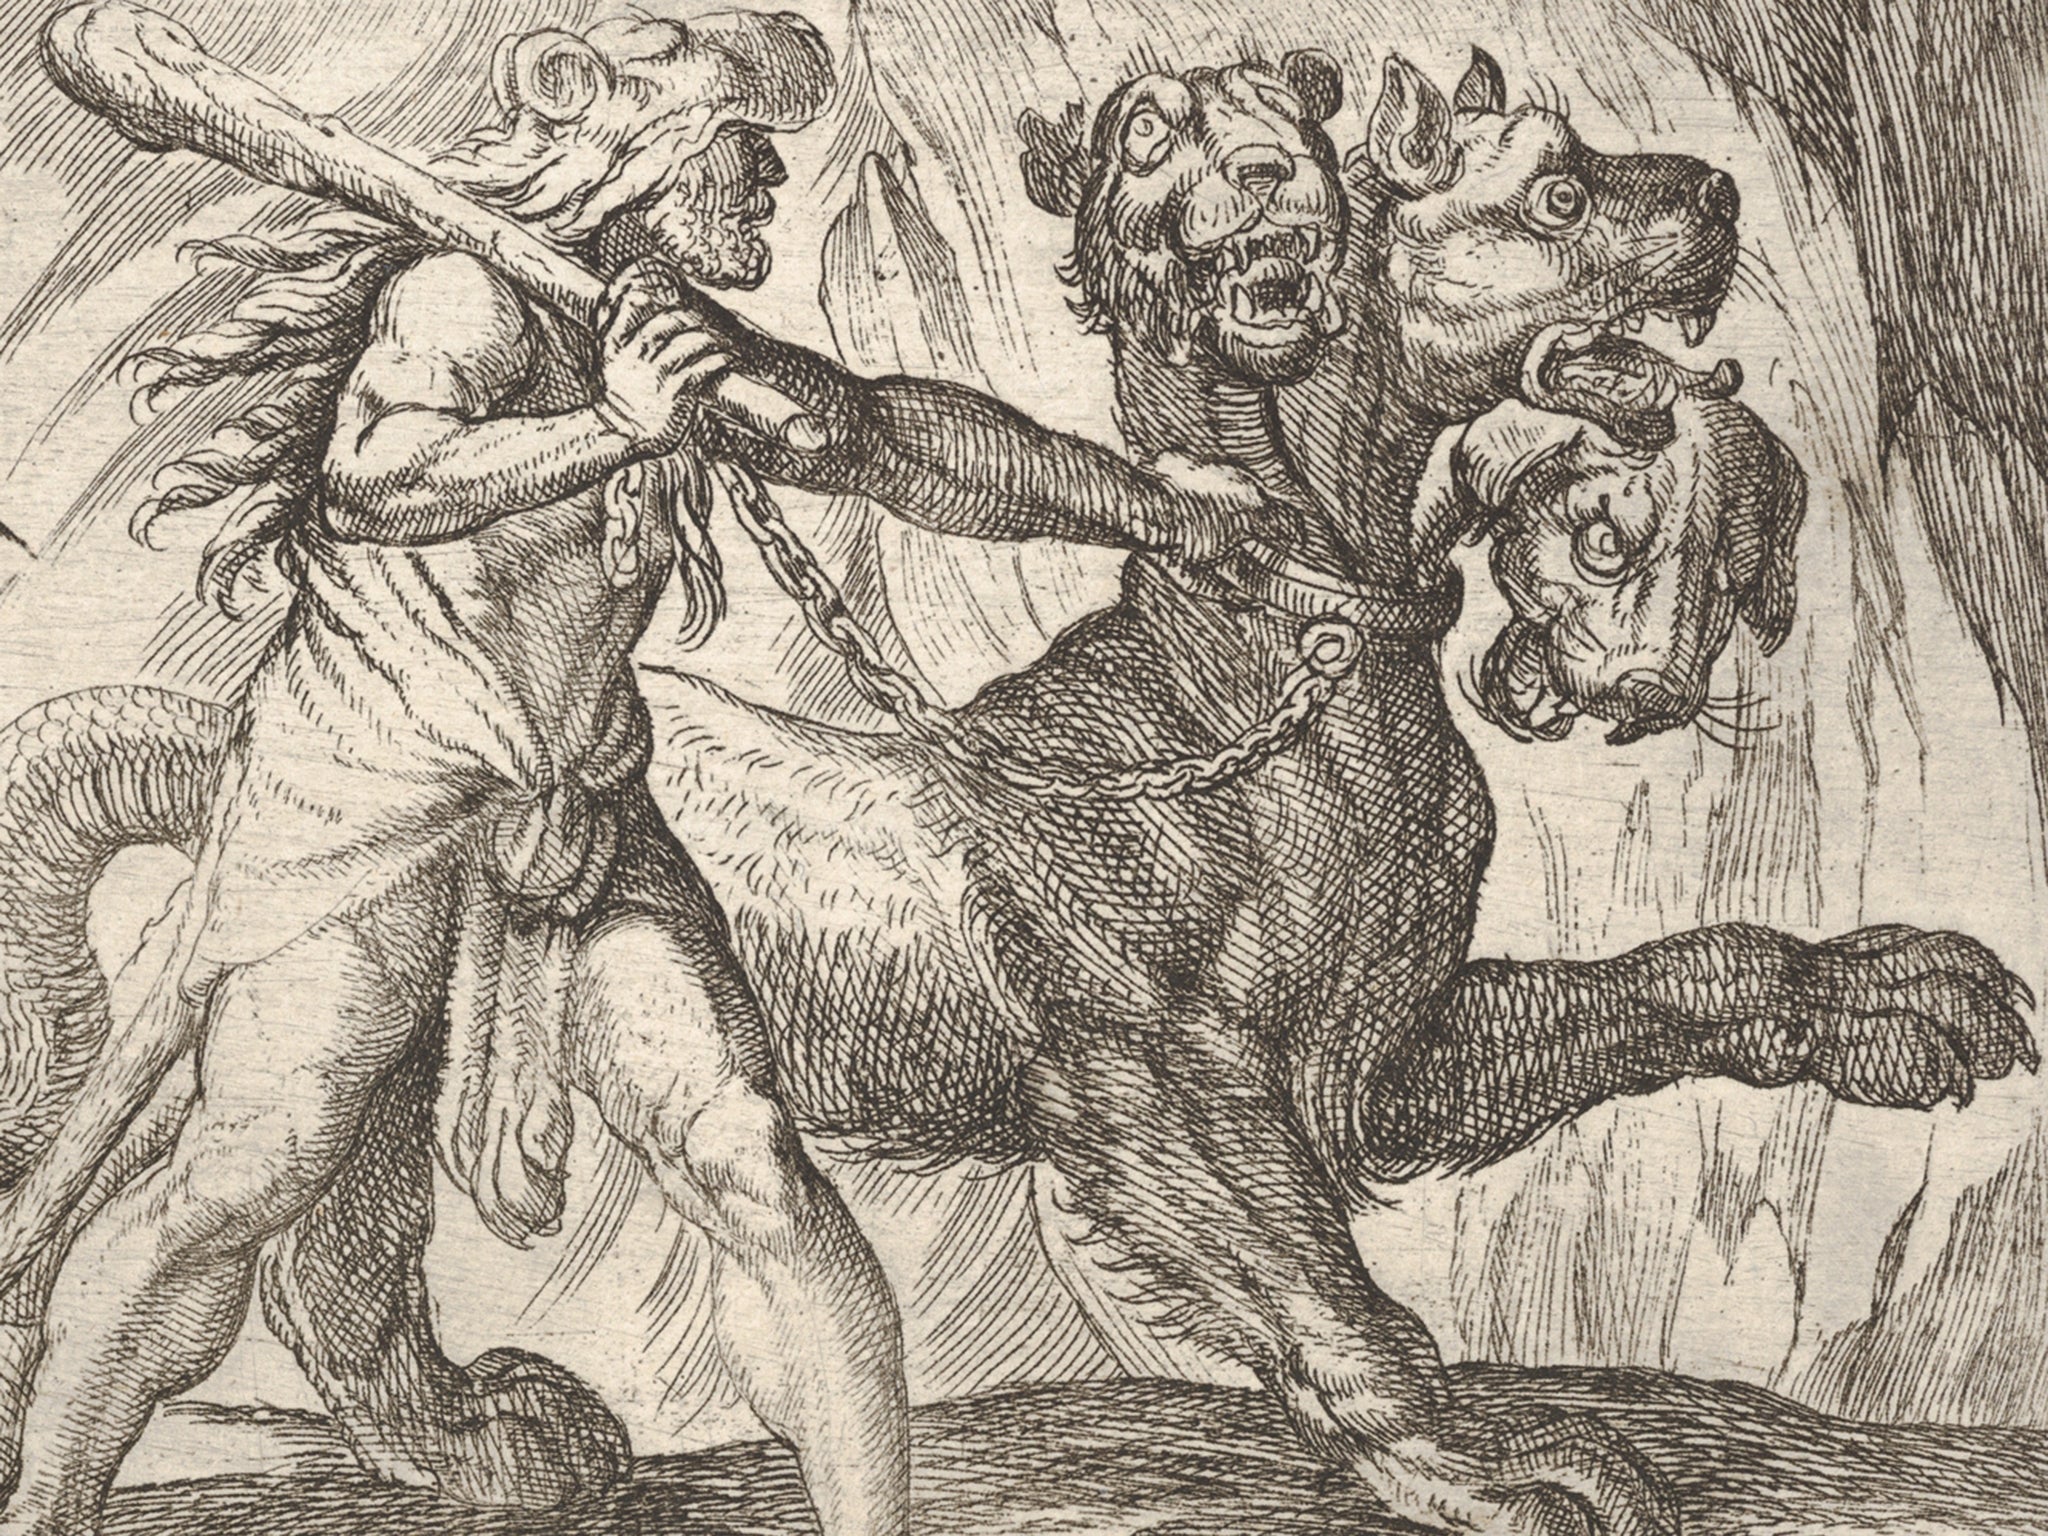 Hercules was getting to grips with Cerberus long before a certain Italian poet raised literary hell